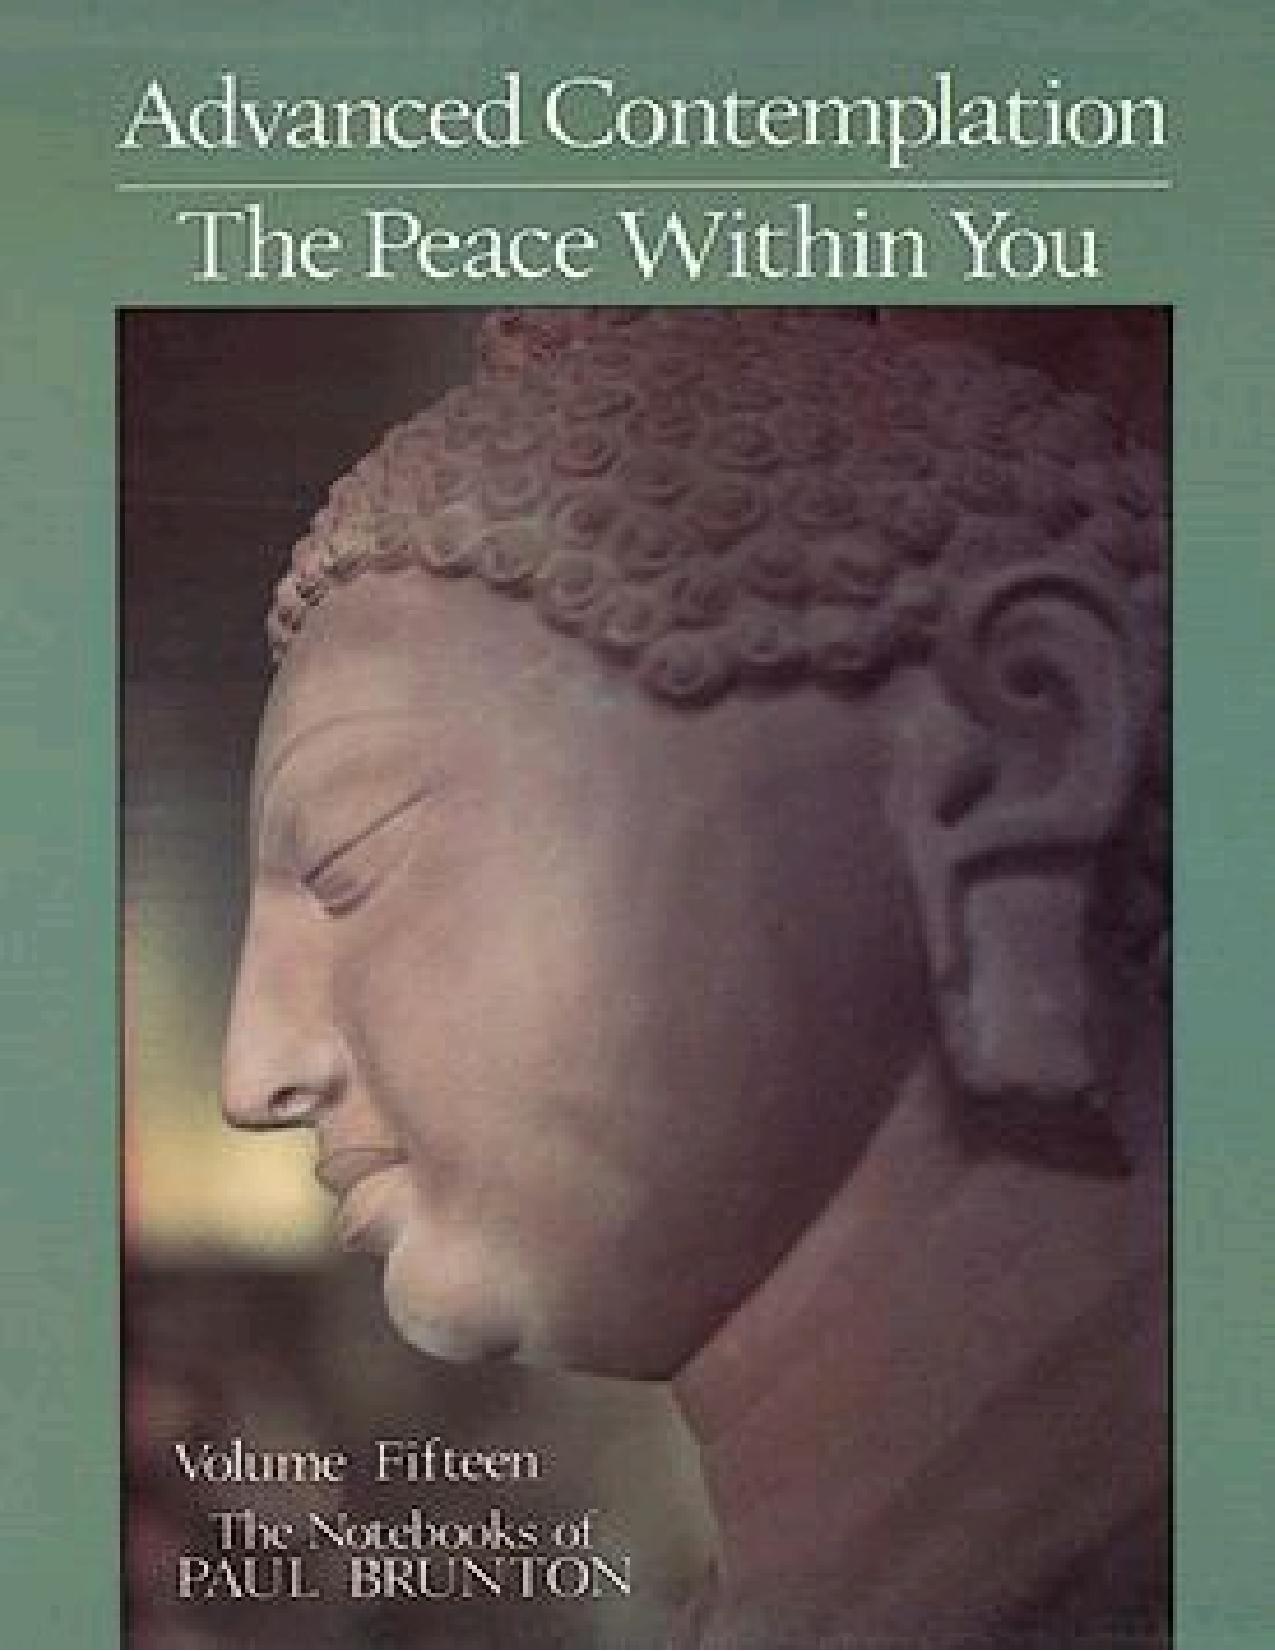 15 - Advanced Contemplation ; The Peace Within You by Paul Brunton